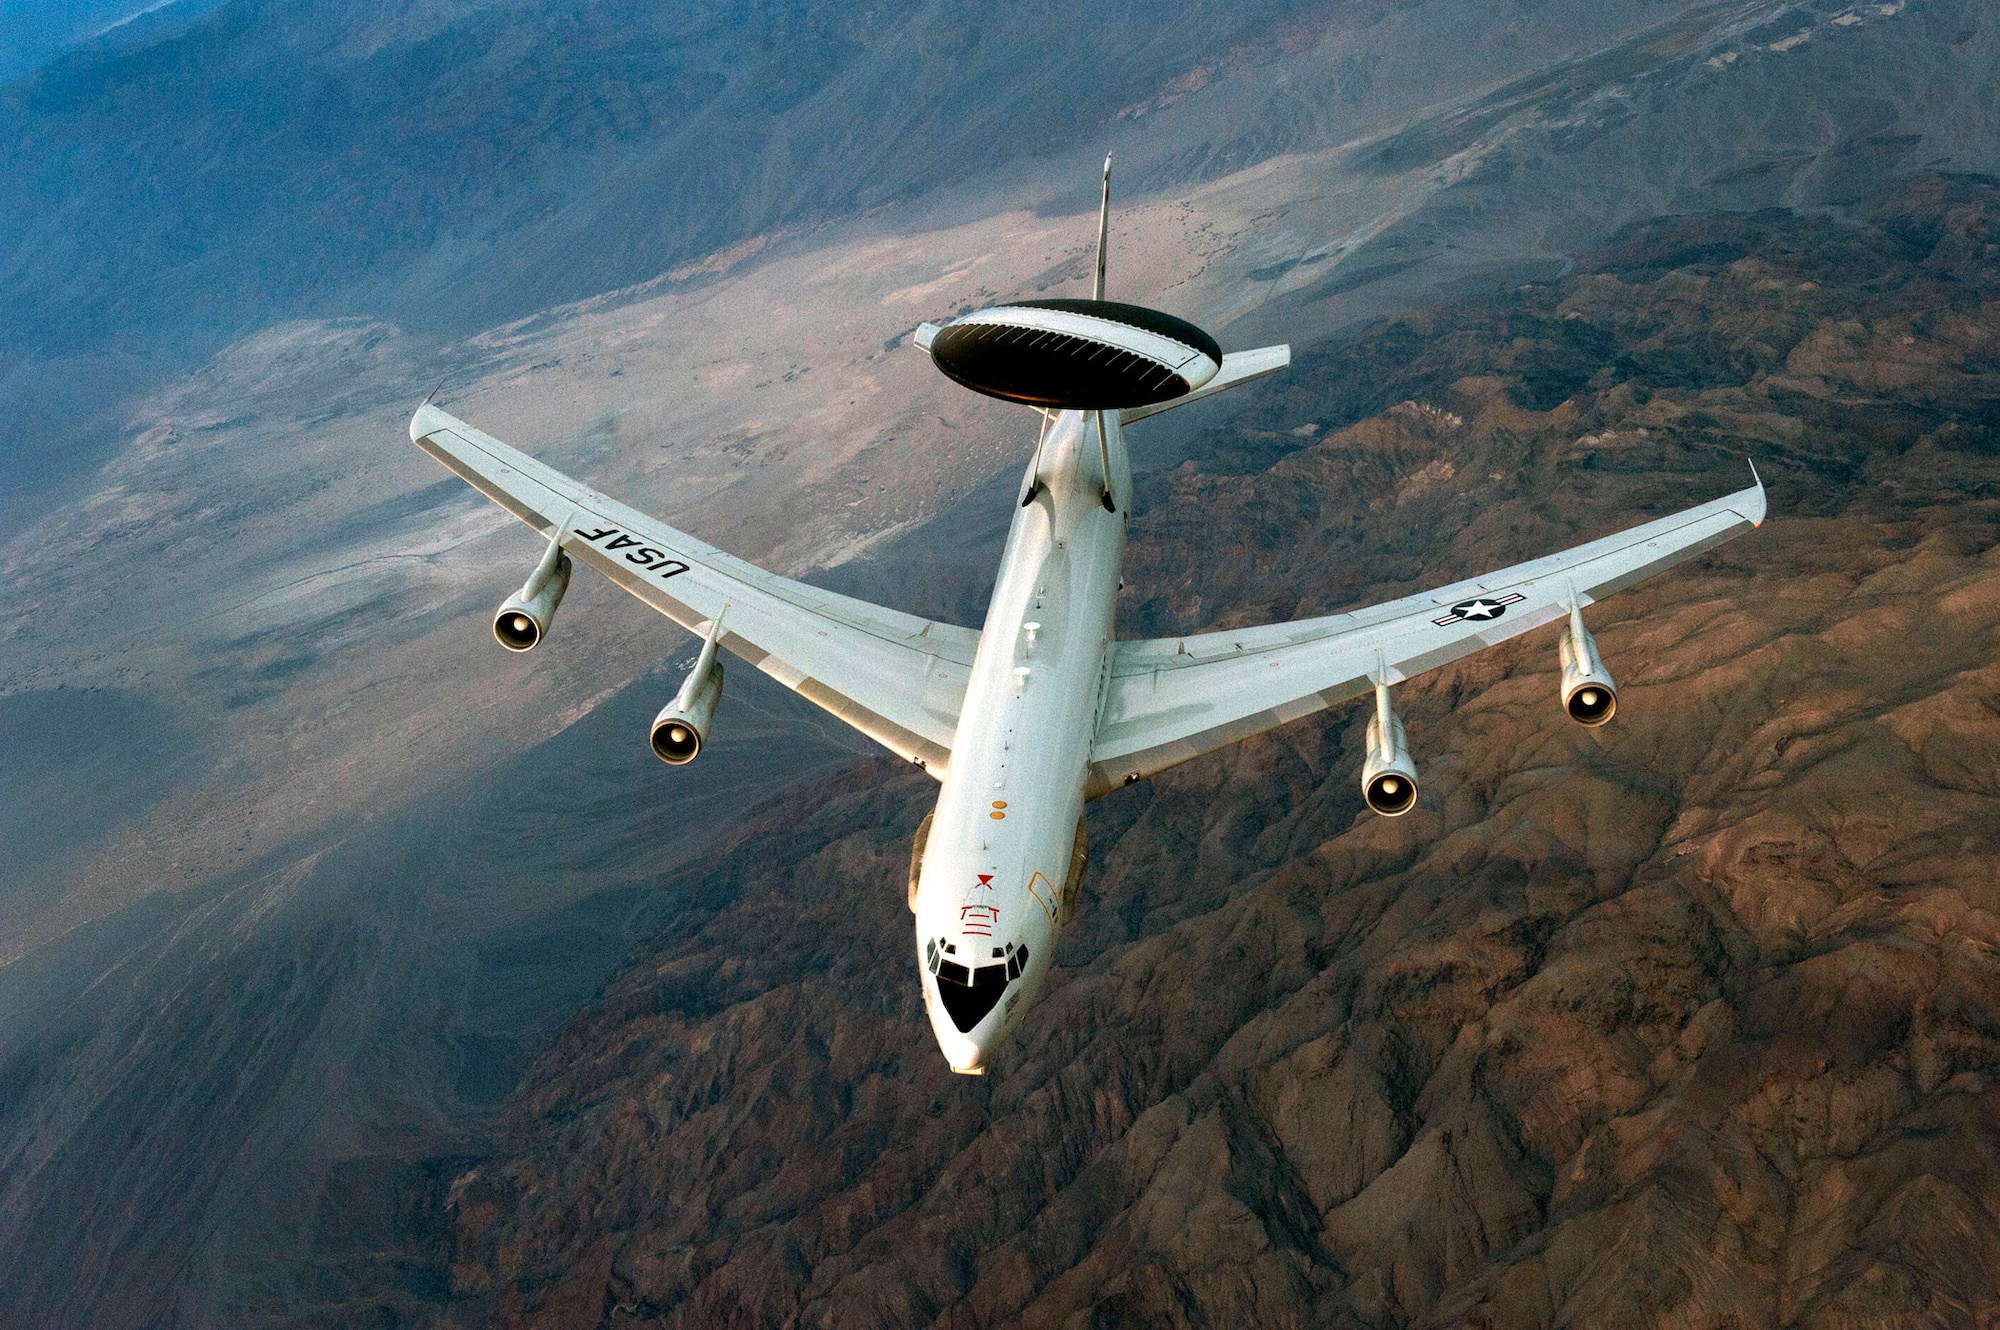 An E-3 Sentry airborne warning and control system aircraft soars over Nevada after a refueling mission during exercise Green Flag-West 13-02 at Nellis Air Force Base, Nev., Nov. 1, 2012. The aircraft is assigned to the 963rd Airborne Air Control Squadron at Tinker Air Force Base, Okla. (U.S. Air Force photo/Val Gempis)